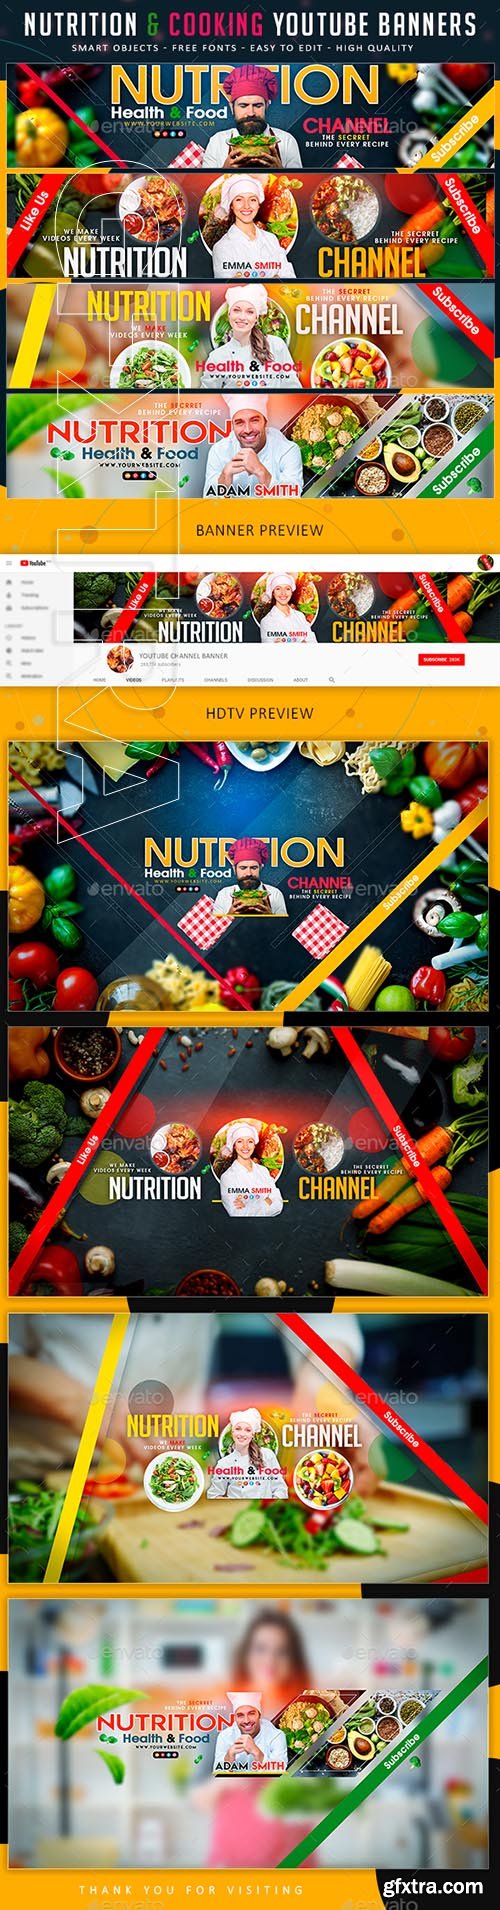 GraphicRiver - Nutrition & Cooking YouTube Banner 21925512